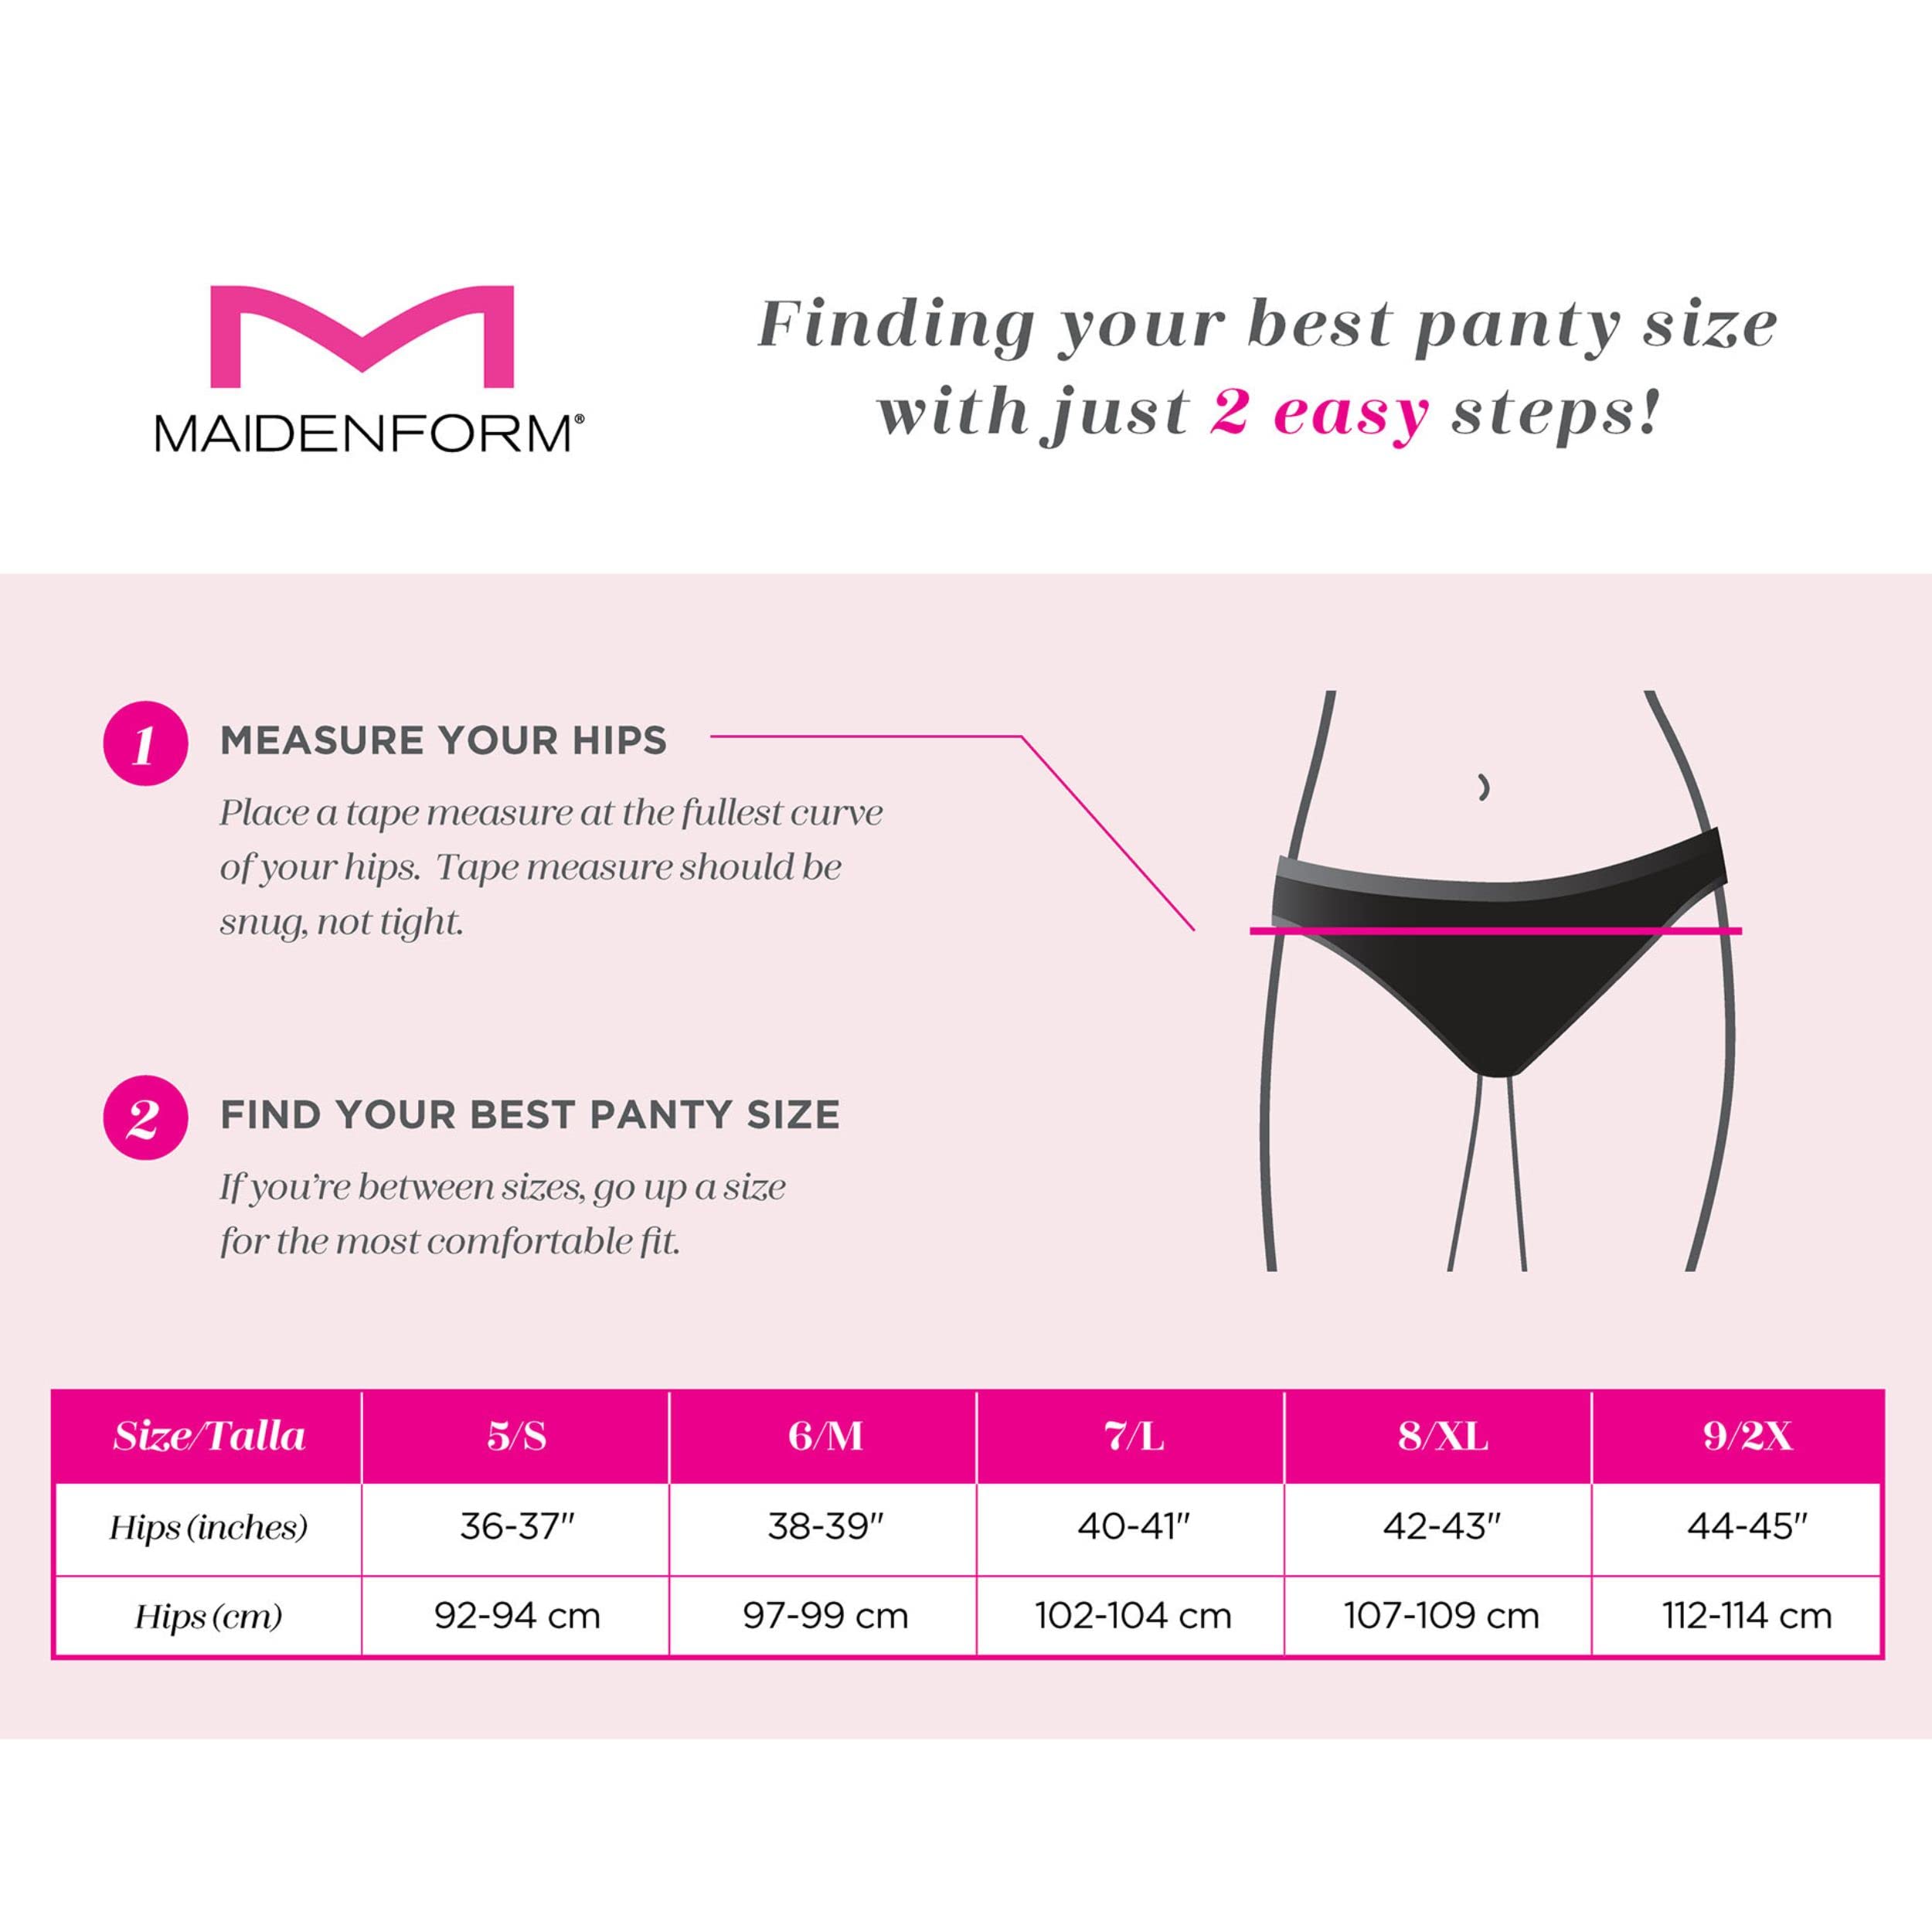 Maidenform Women's Hi-Cut Underwear, Barely There Invisible Look High-Waisted Panty, 3-Pack